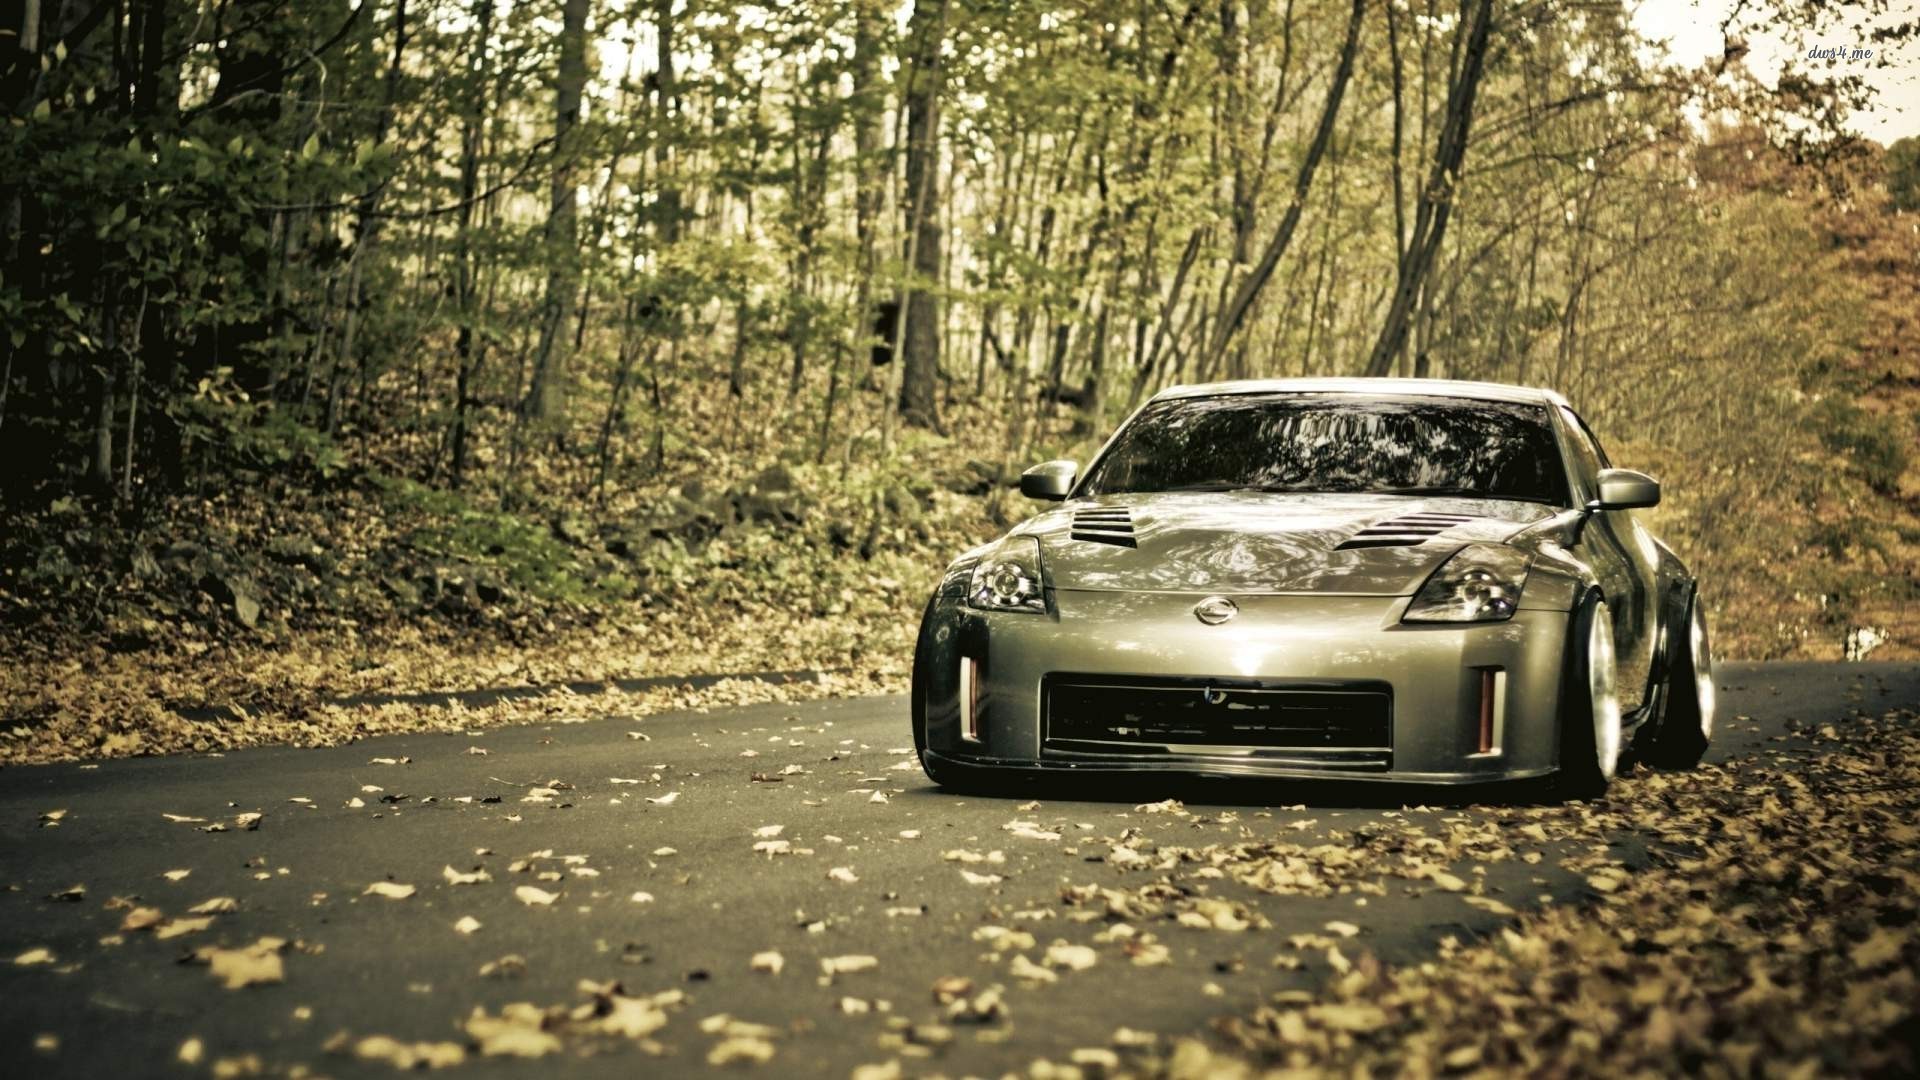 Top High Quality Nissan 350z Images   Nice Collection 1920x1080